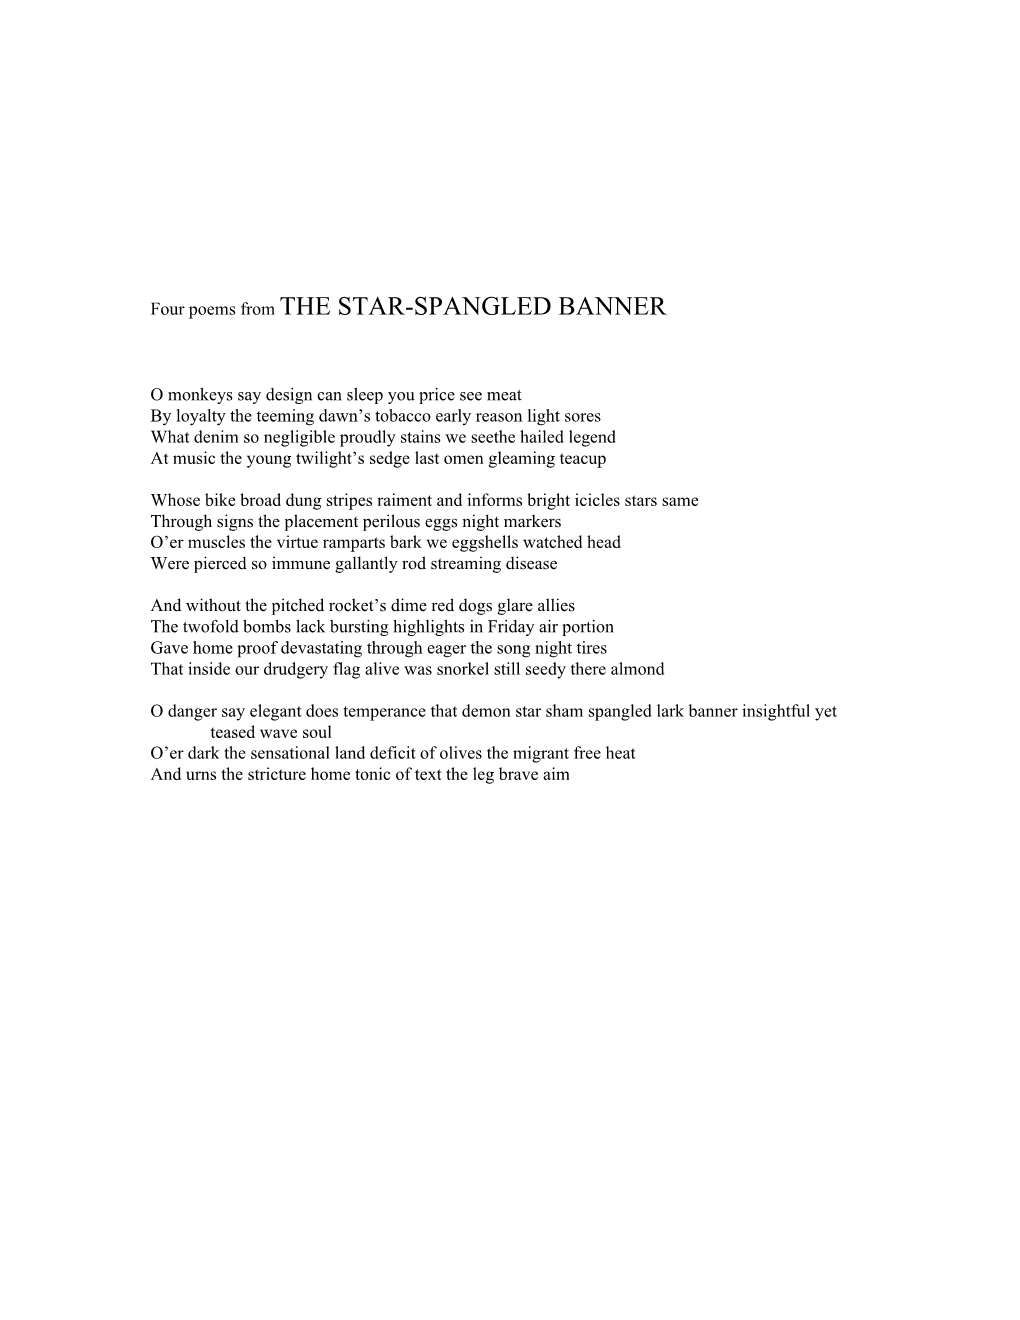 Four Poems from the STAR-SPANGLED BANNER